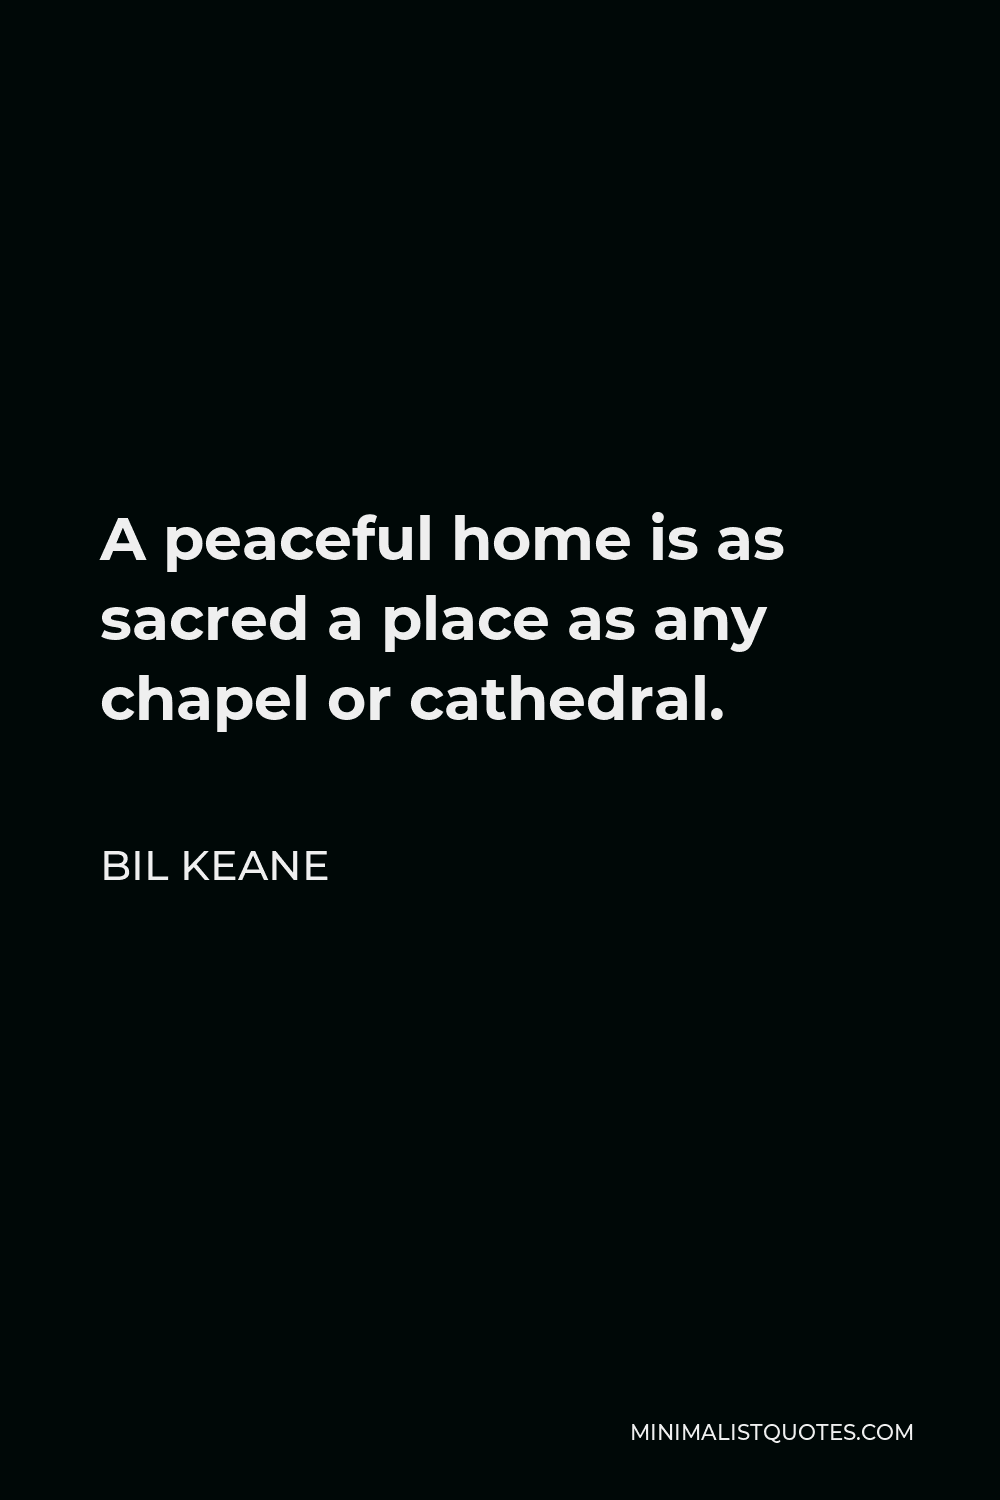 Bil Keane Quote - A peaceful home is as sacred a place as any chapel or cathedral.